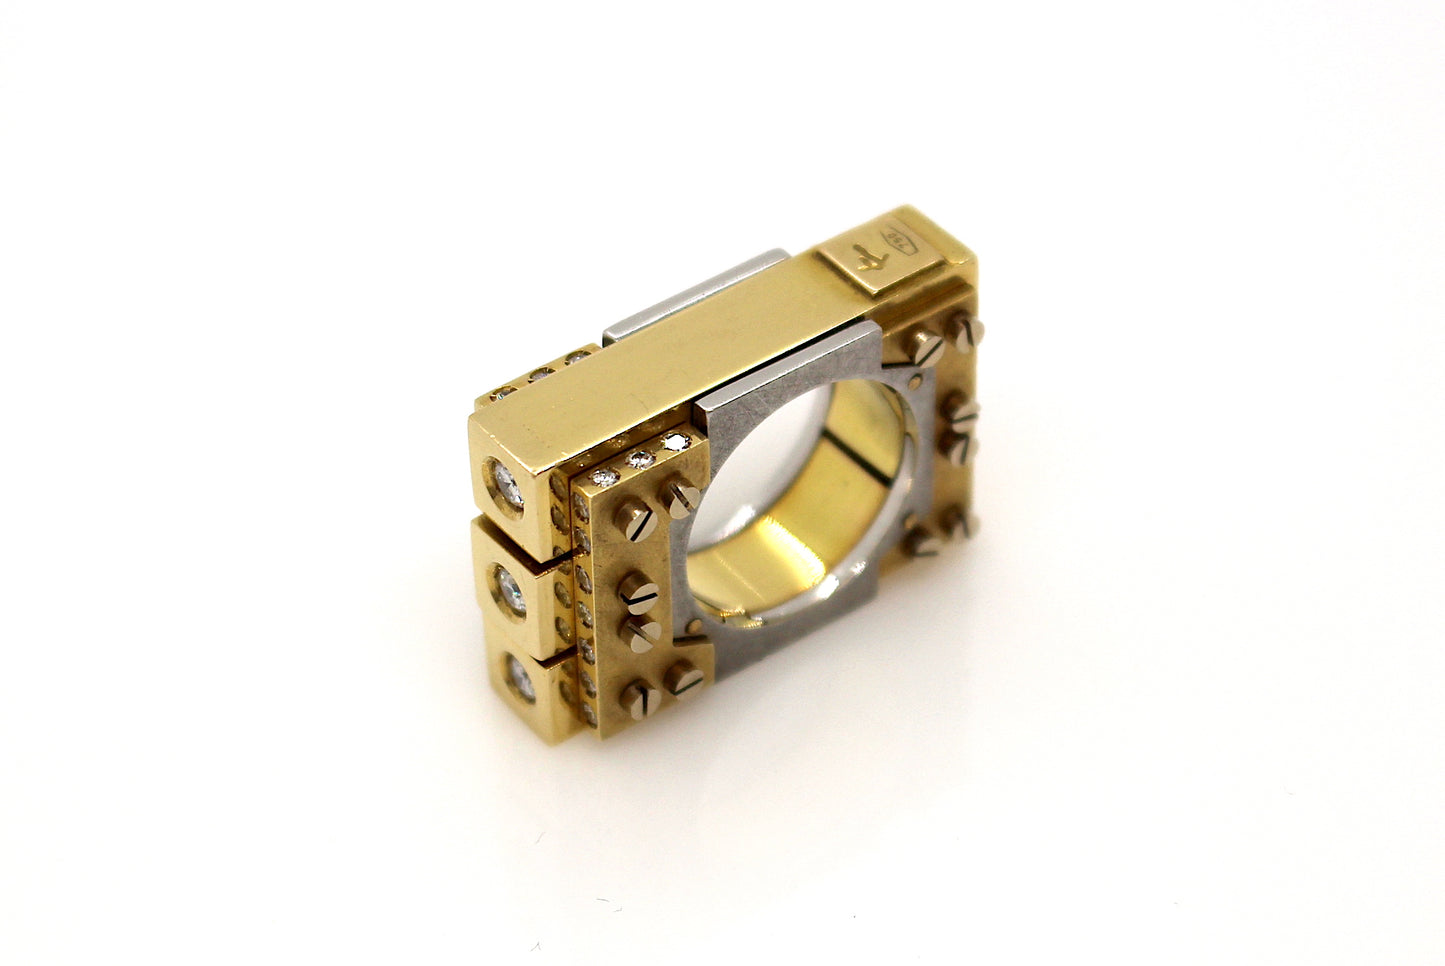 18ct gold ring by Constantinos Kyriacou. With diamonds. (2000)